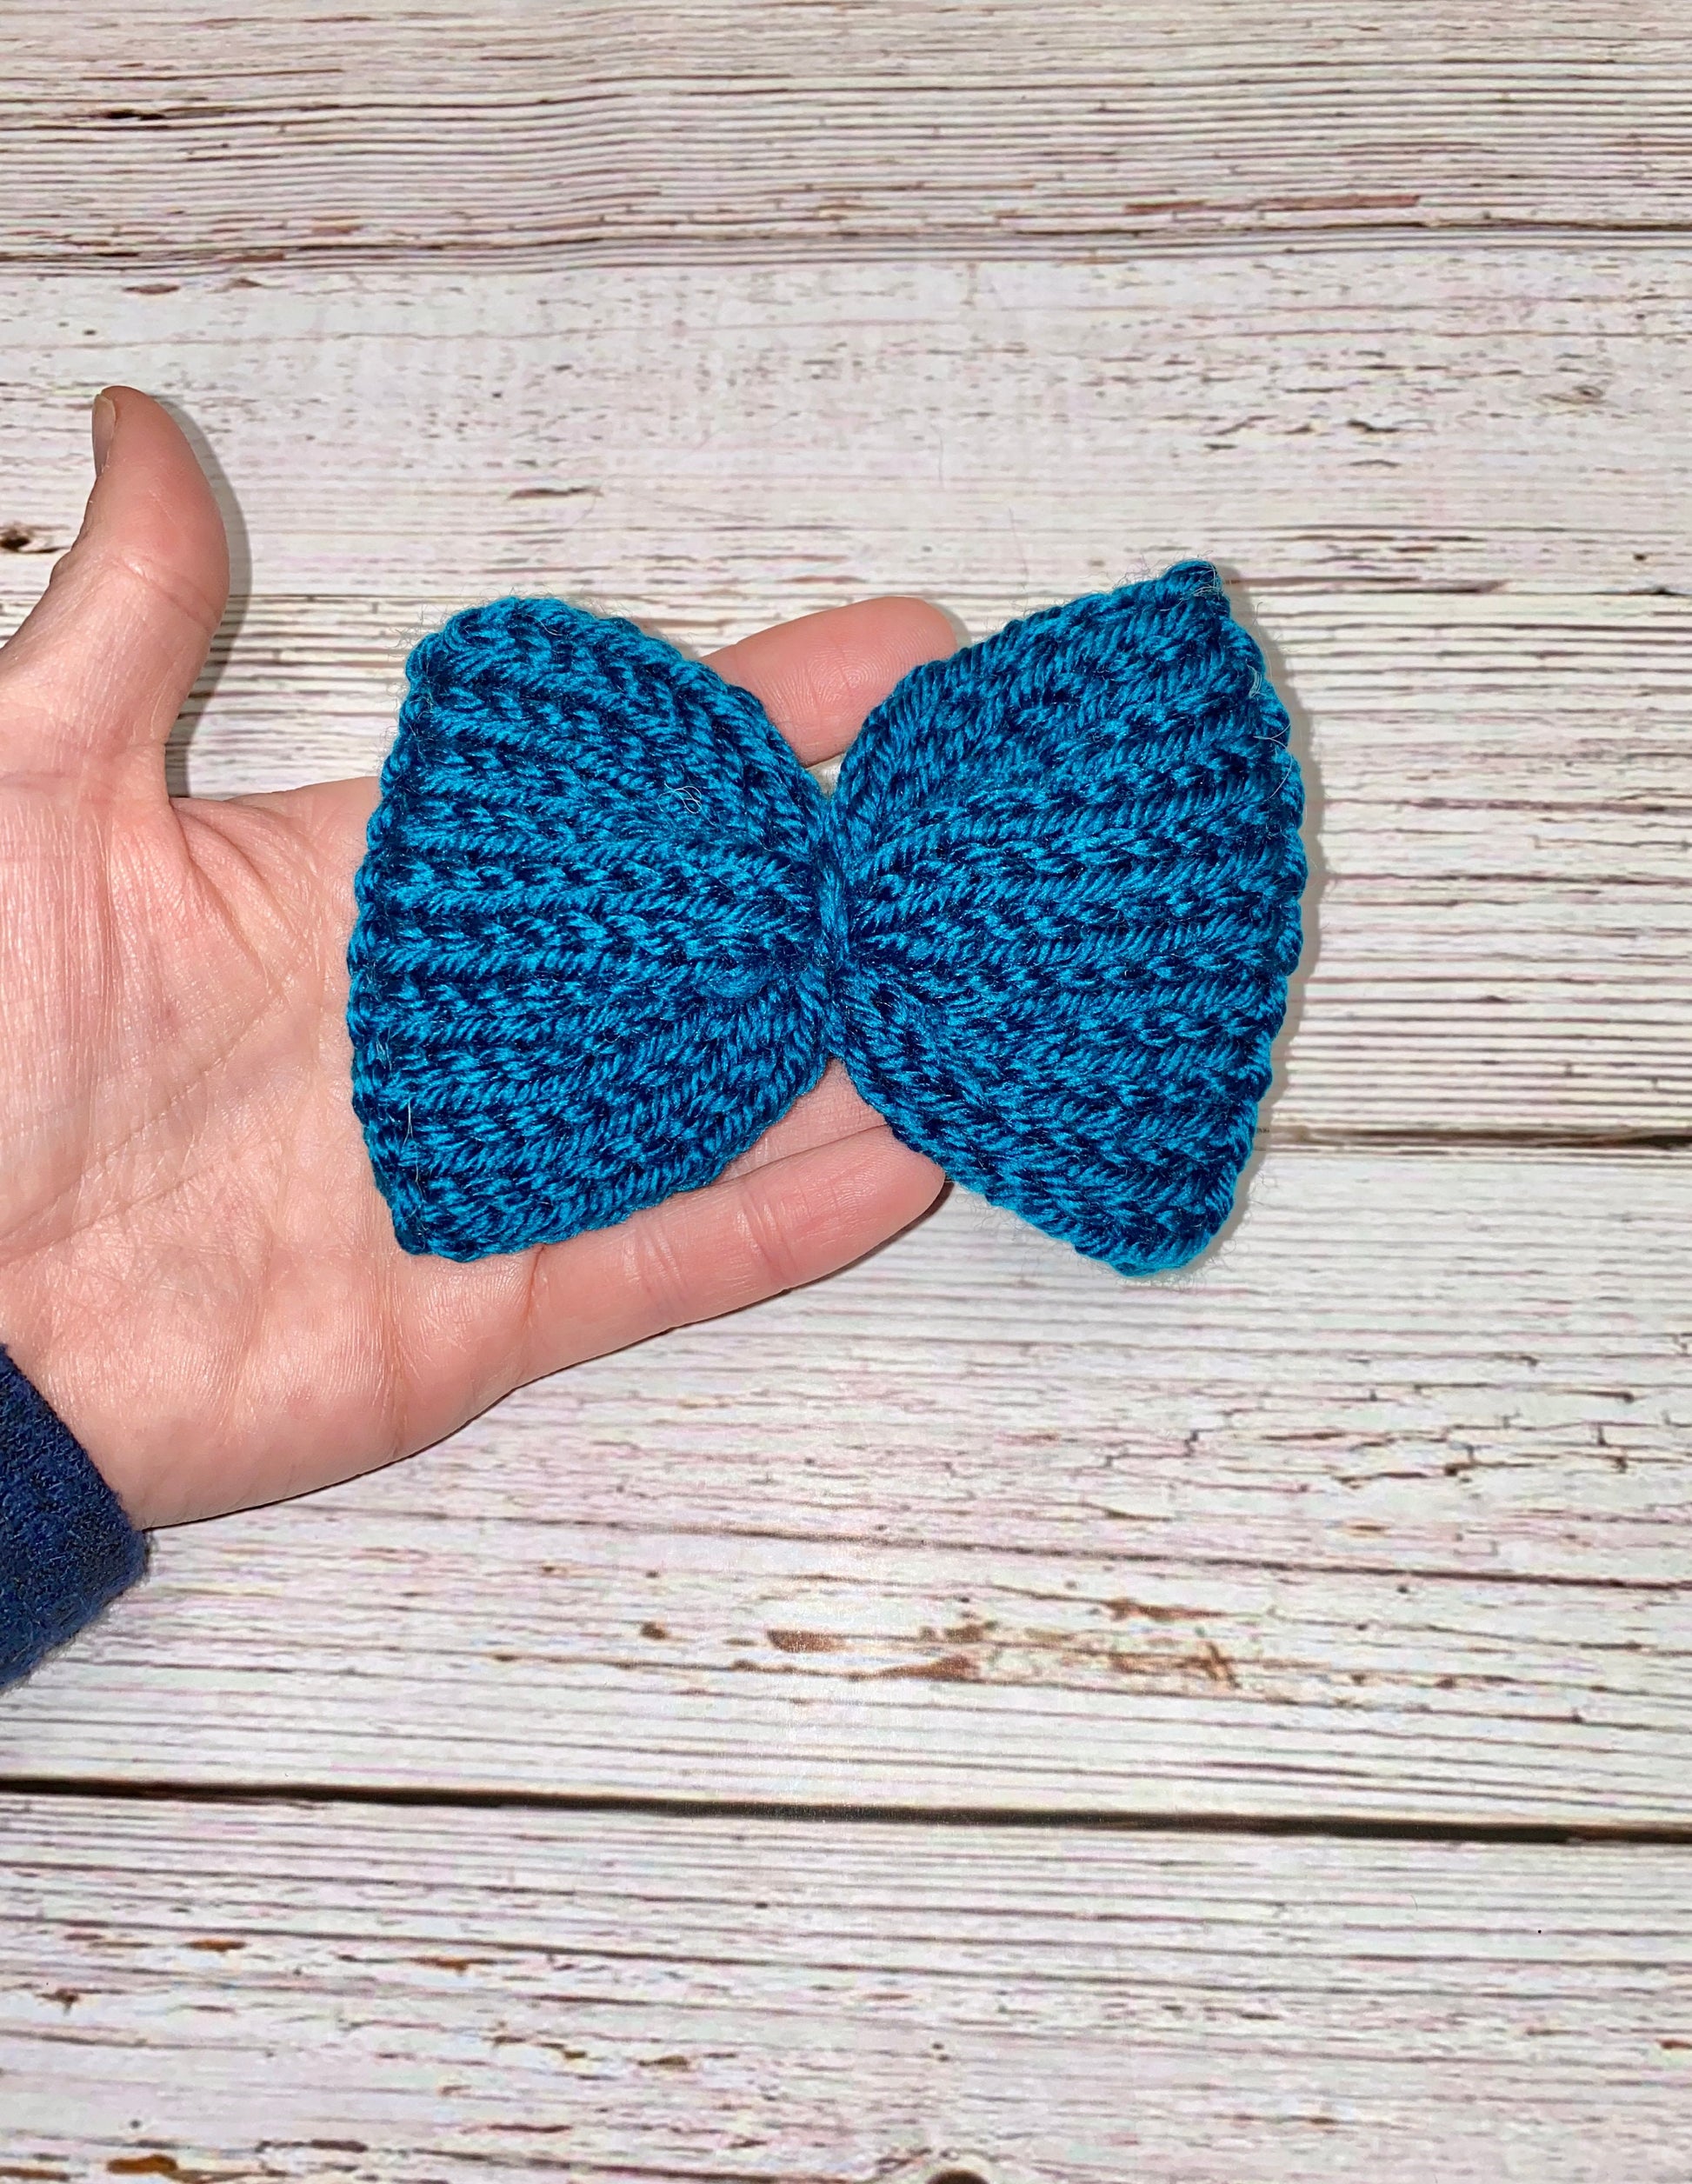 Knitted Hair Bow Clip, Knitted Hair Tie Bow, Soft Knitted Hair Accessory Bow, Knit Bow Barrette, Chic Knitted Bow Ponytail Holder,